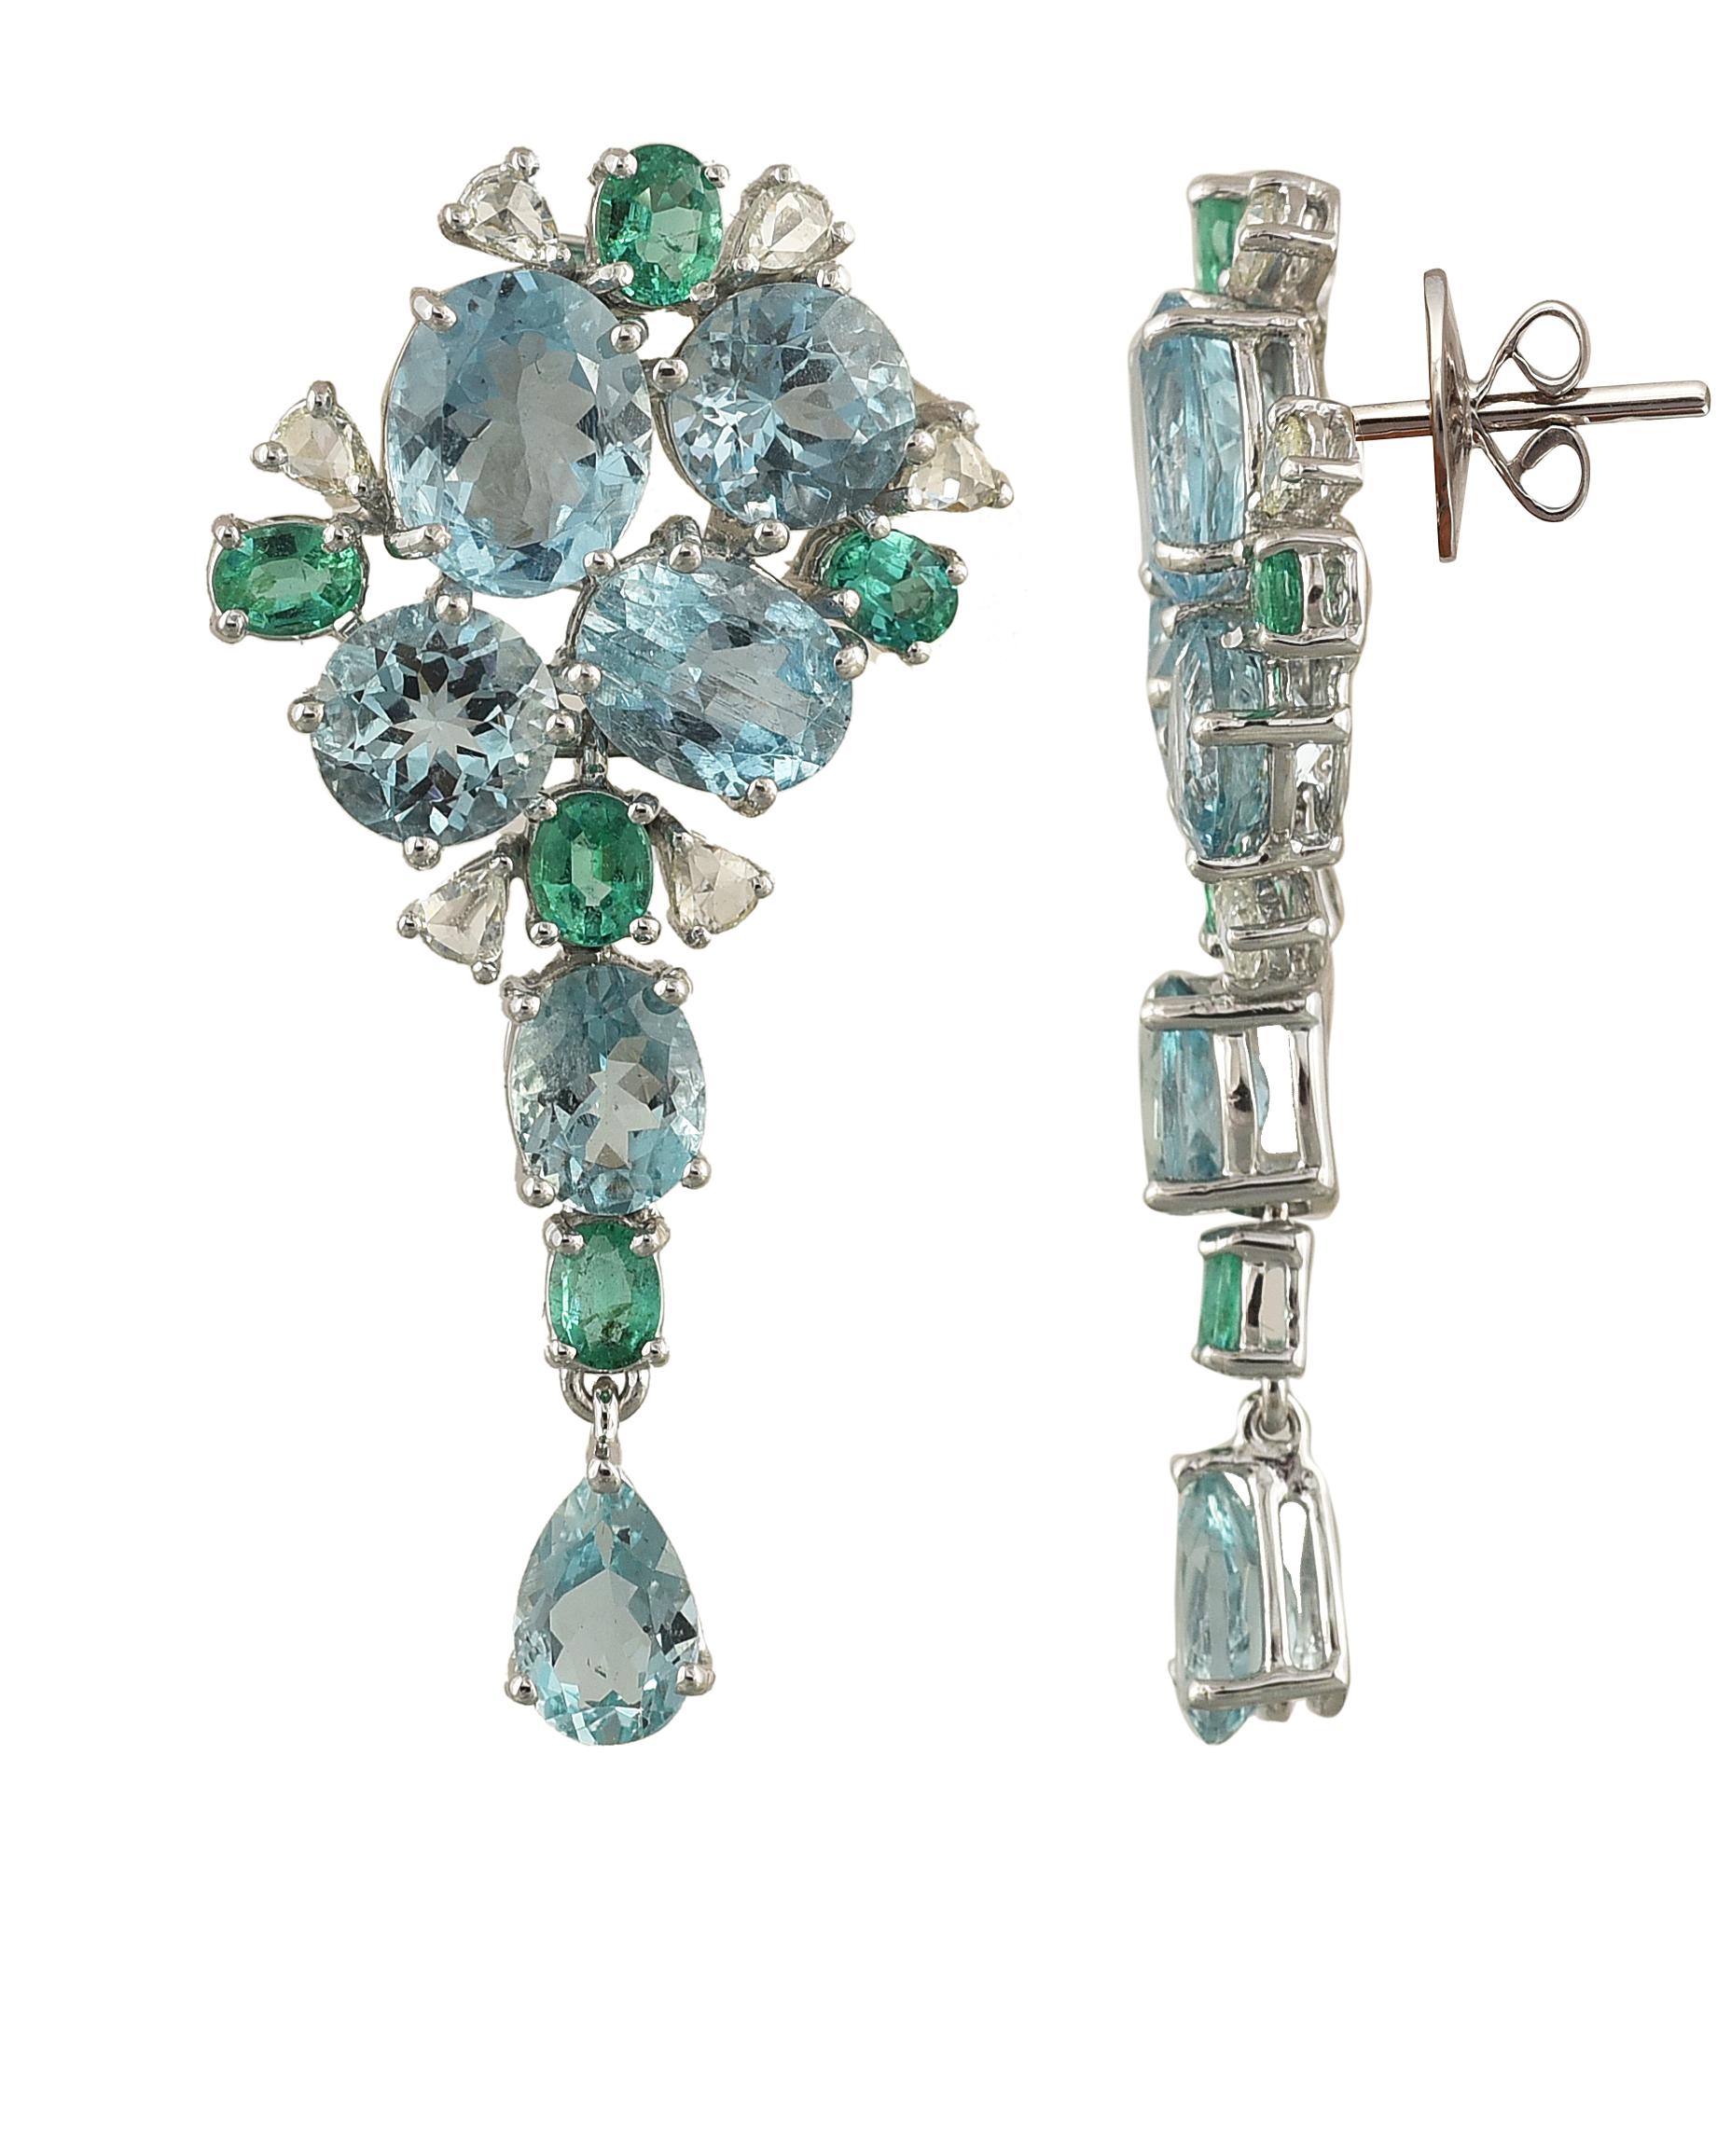 A gorgeous pair of Aquamarine, Emerald and Rose Cut Diamonds Earrings set in 18K white gold.  All the stones, are natural and free of any treatment or heat. The total weight of the Aquamarine and Emeralds is 15.82 carats. The weight of the rose cut